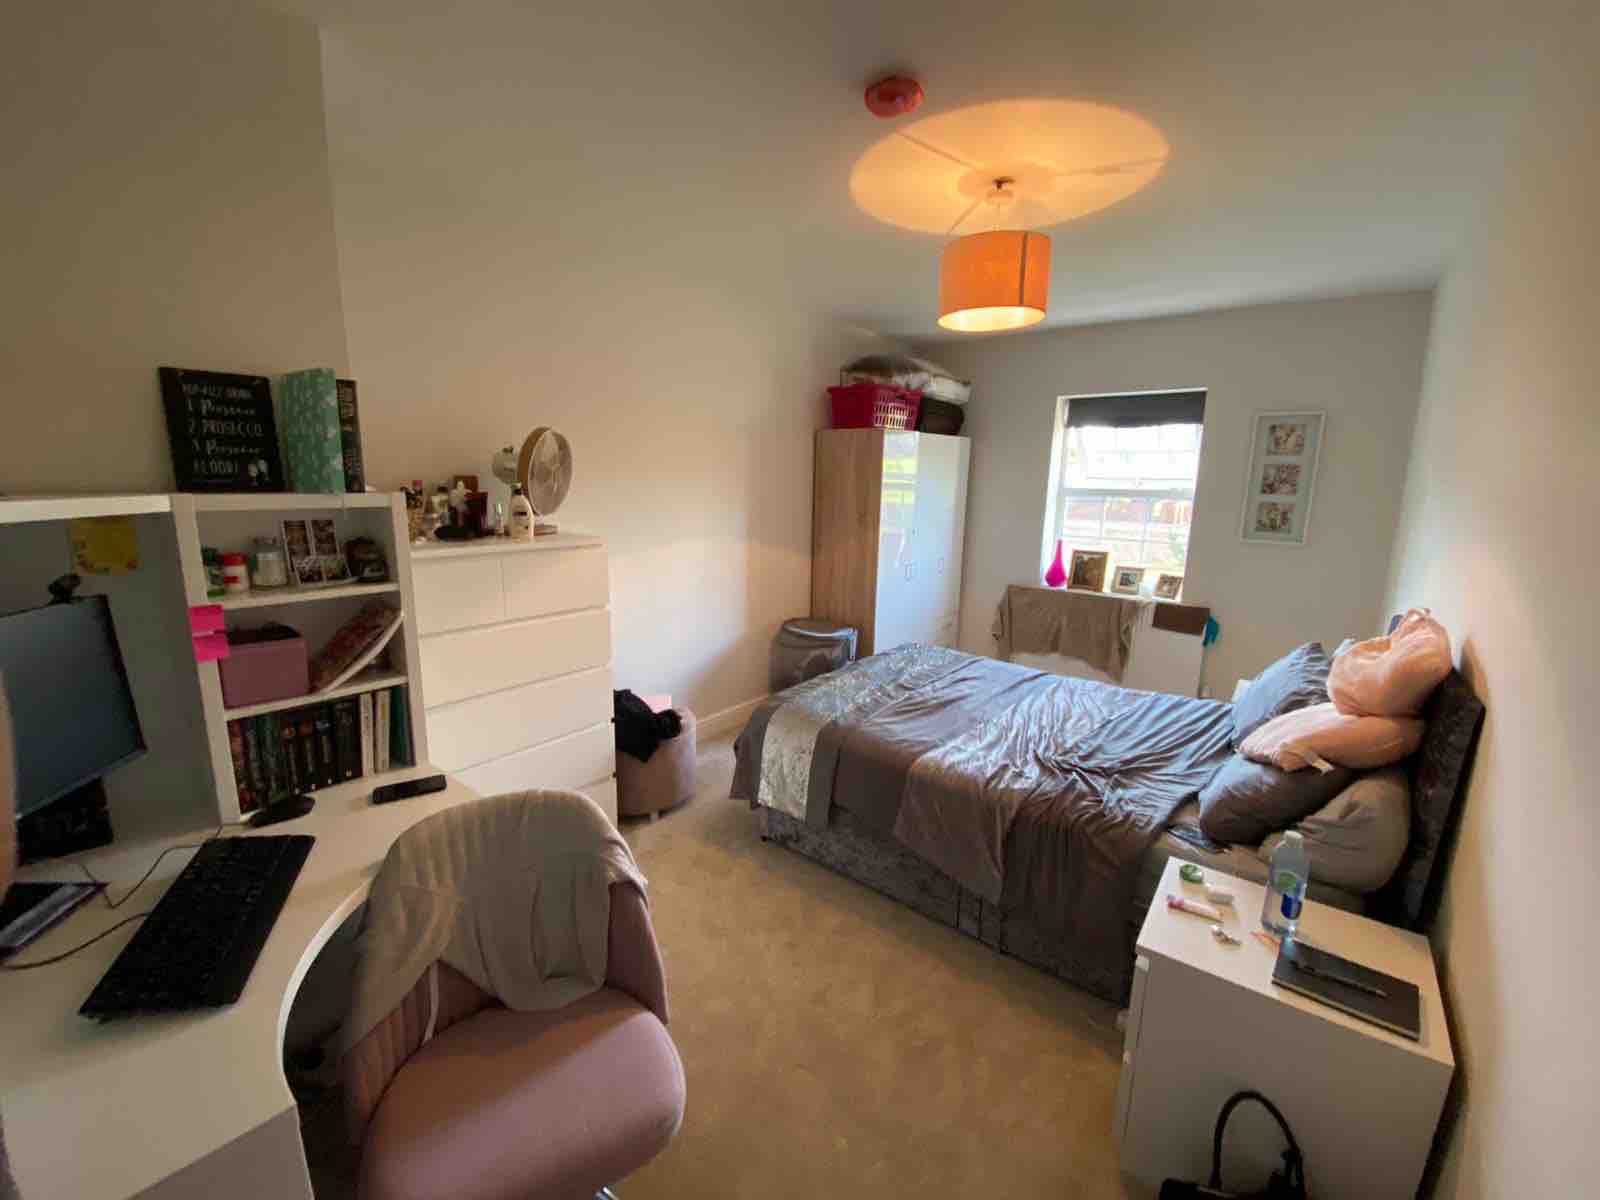 3 bedrooms RoomsLocal image